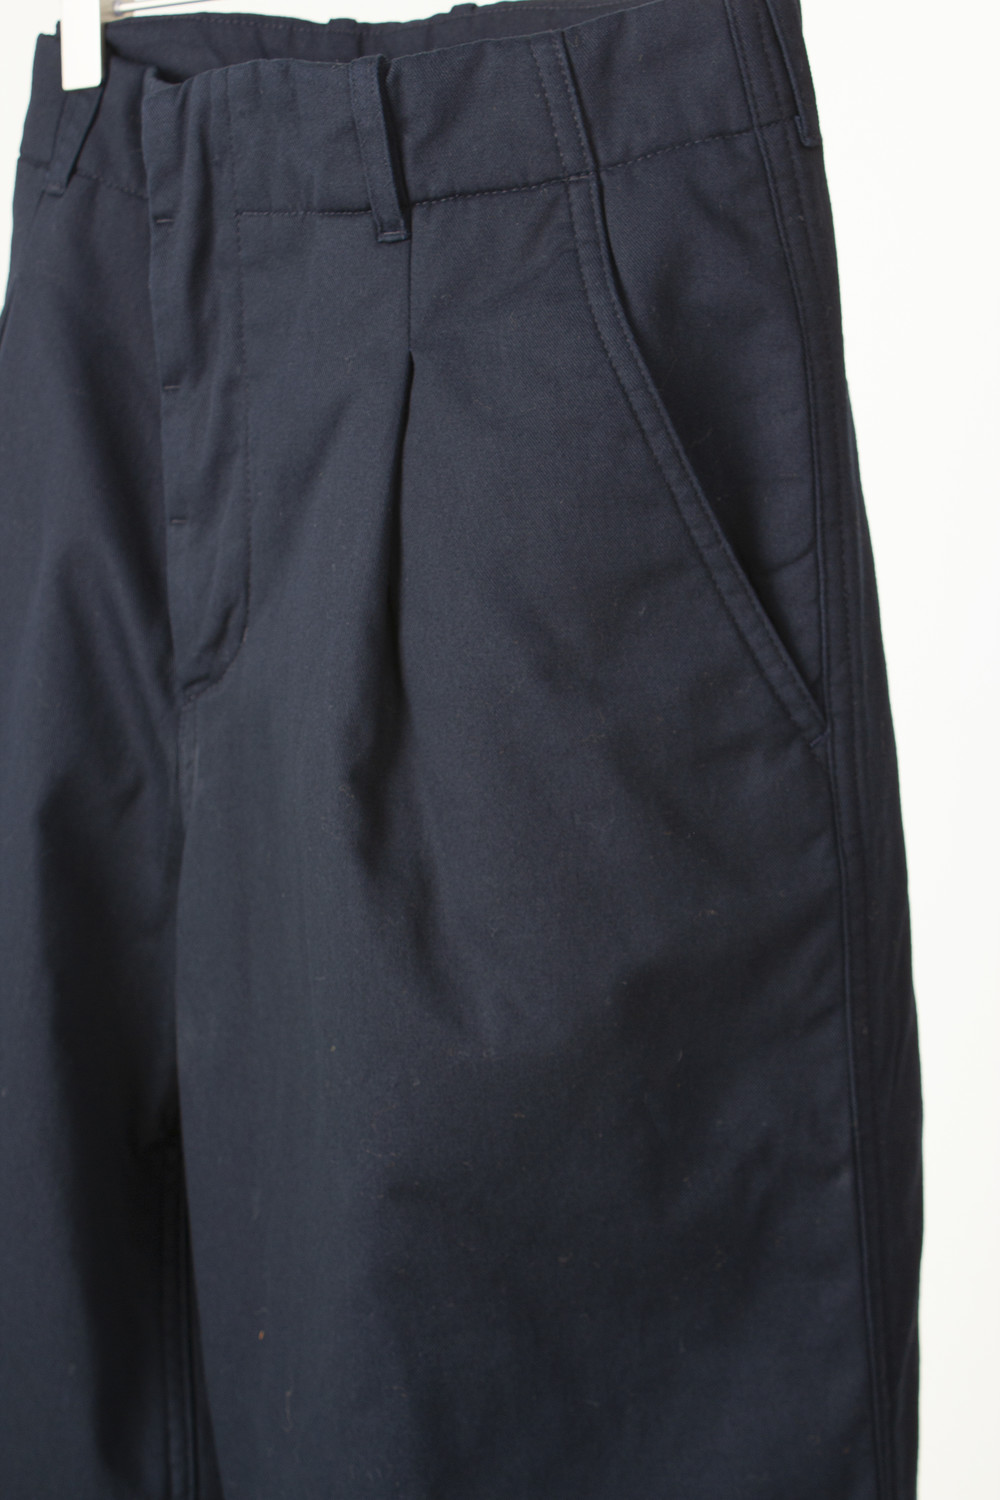 COTTON TWILL PADDED TUCKED TROUSERS _ NAVY